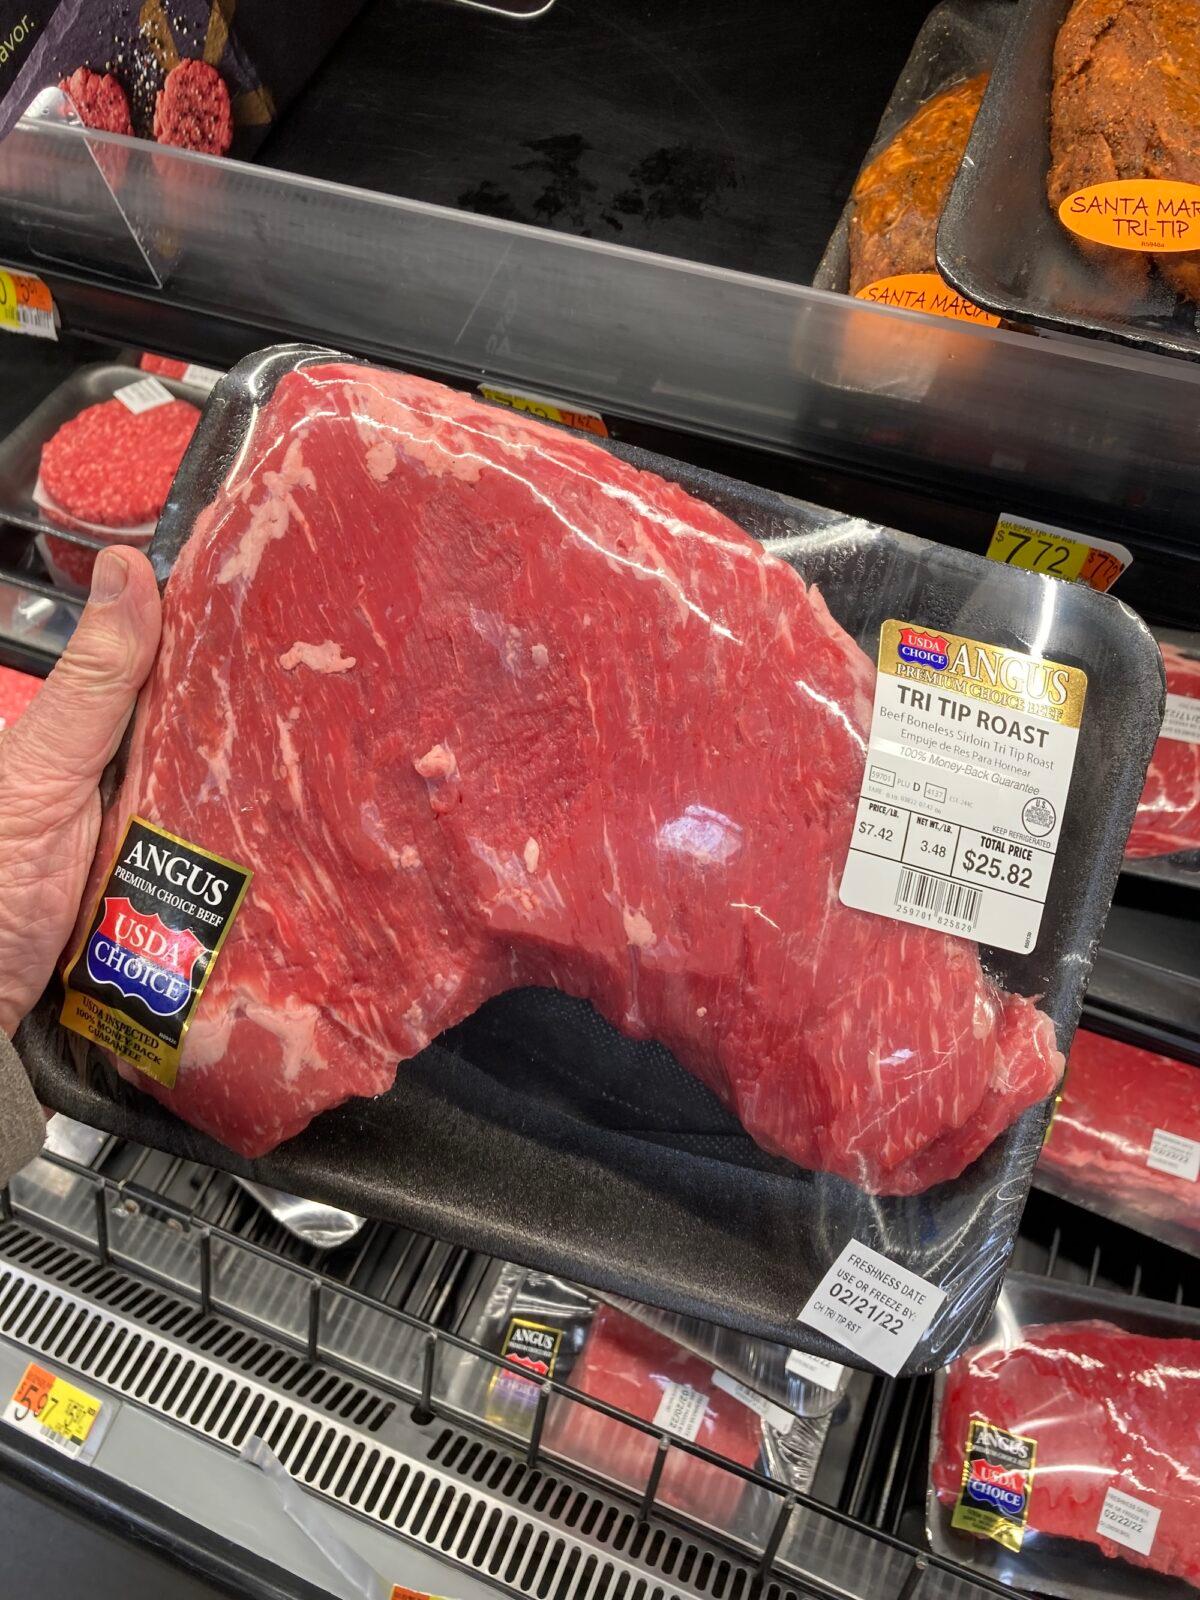 A 3.48-pound package of beef roast sold for $25.82 at Walmart in Flagstaff, Ariz., on Feb. 17, 2022. (Allan Stein/The Epoch Times)